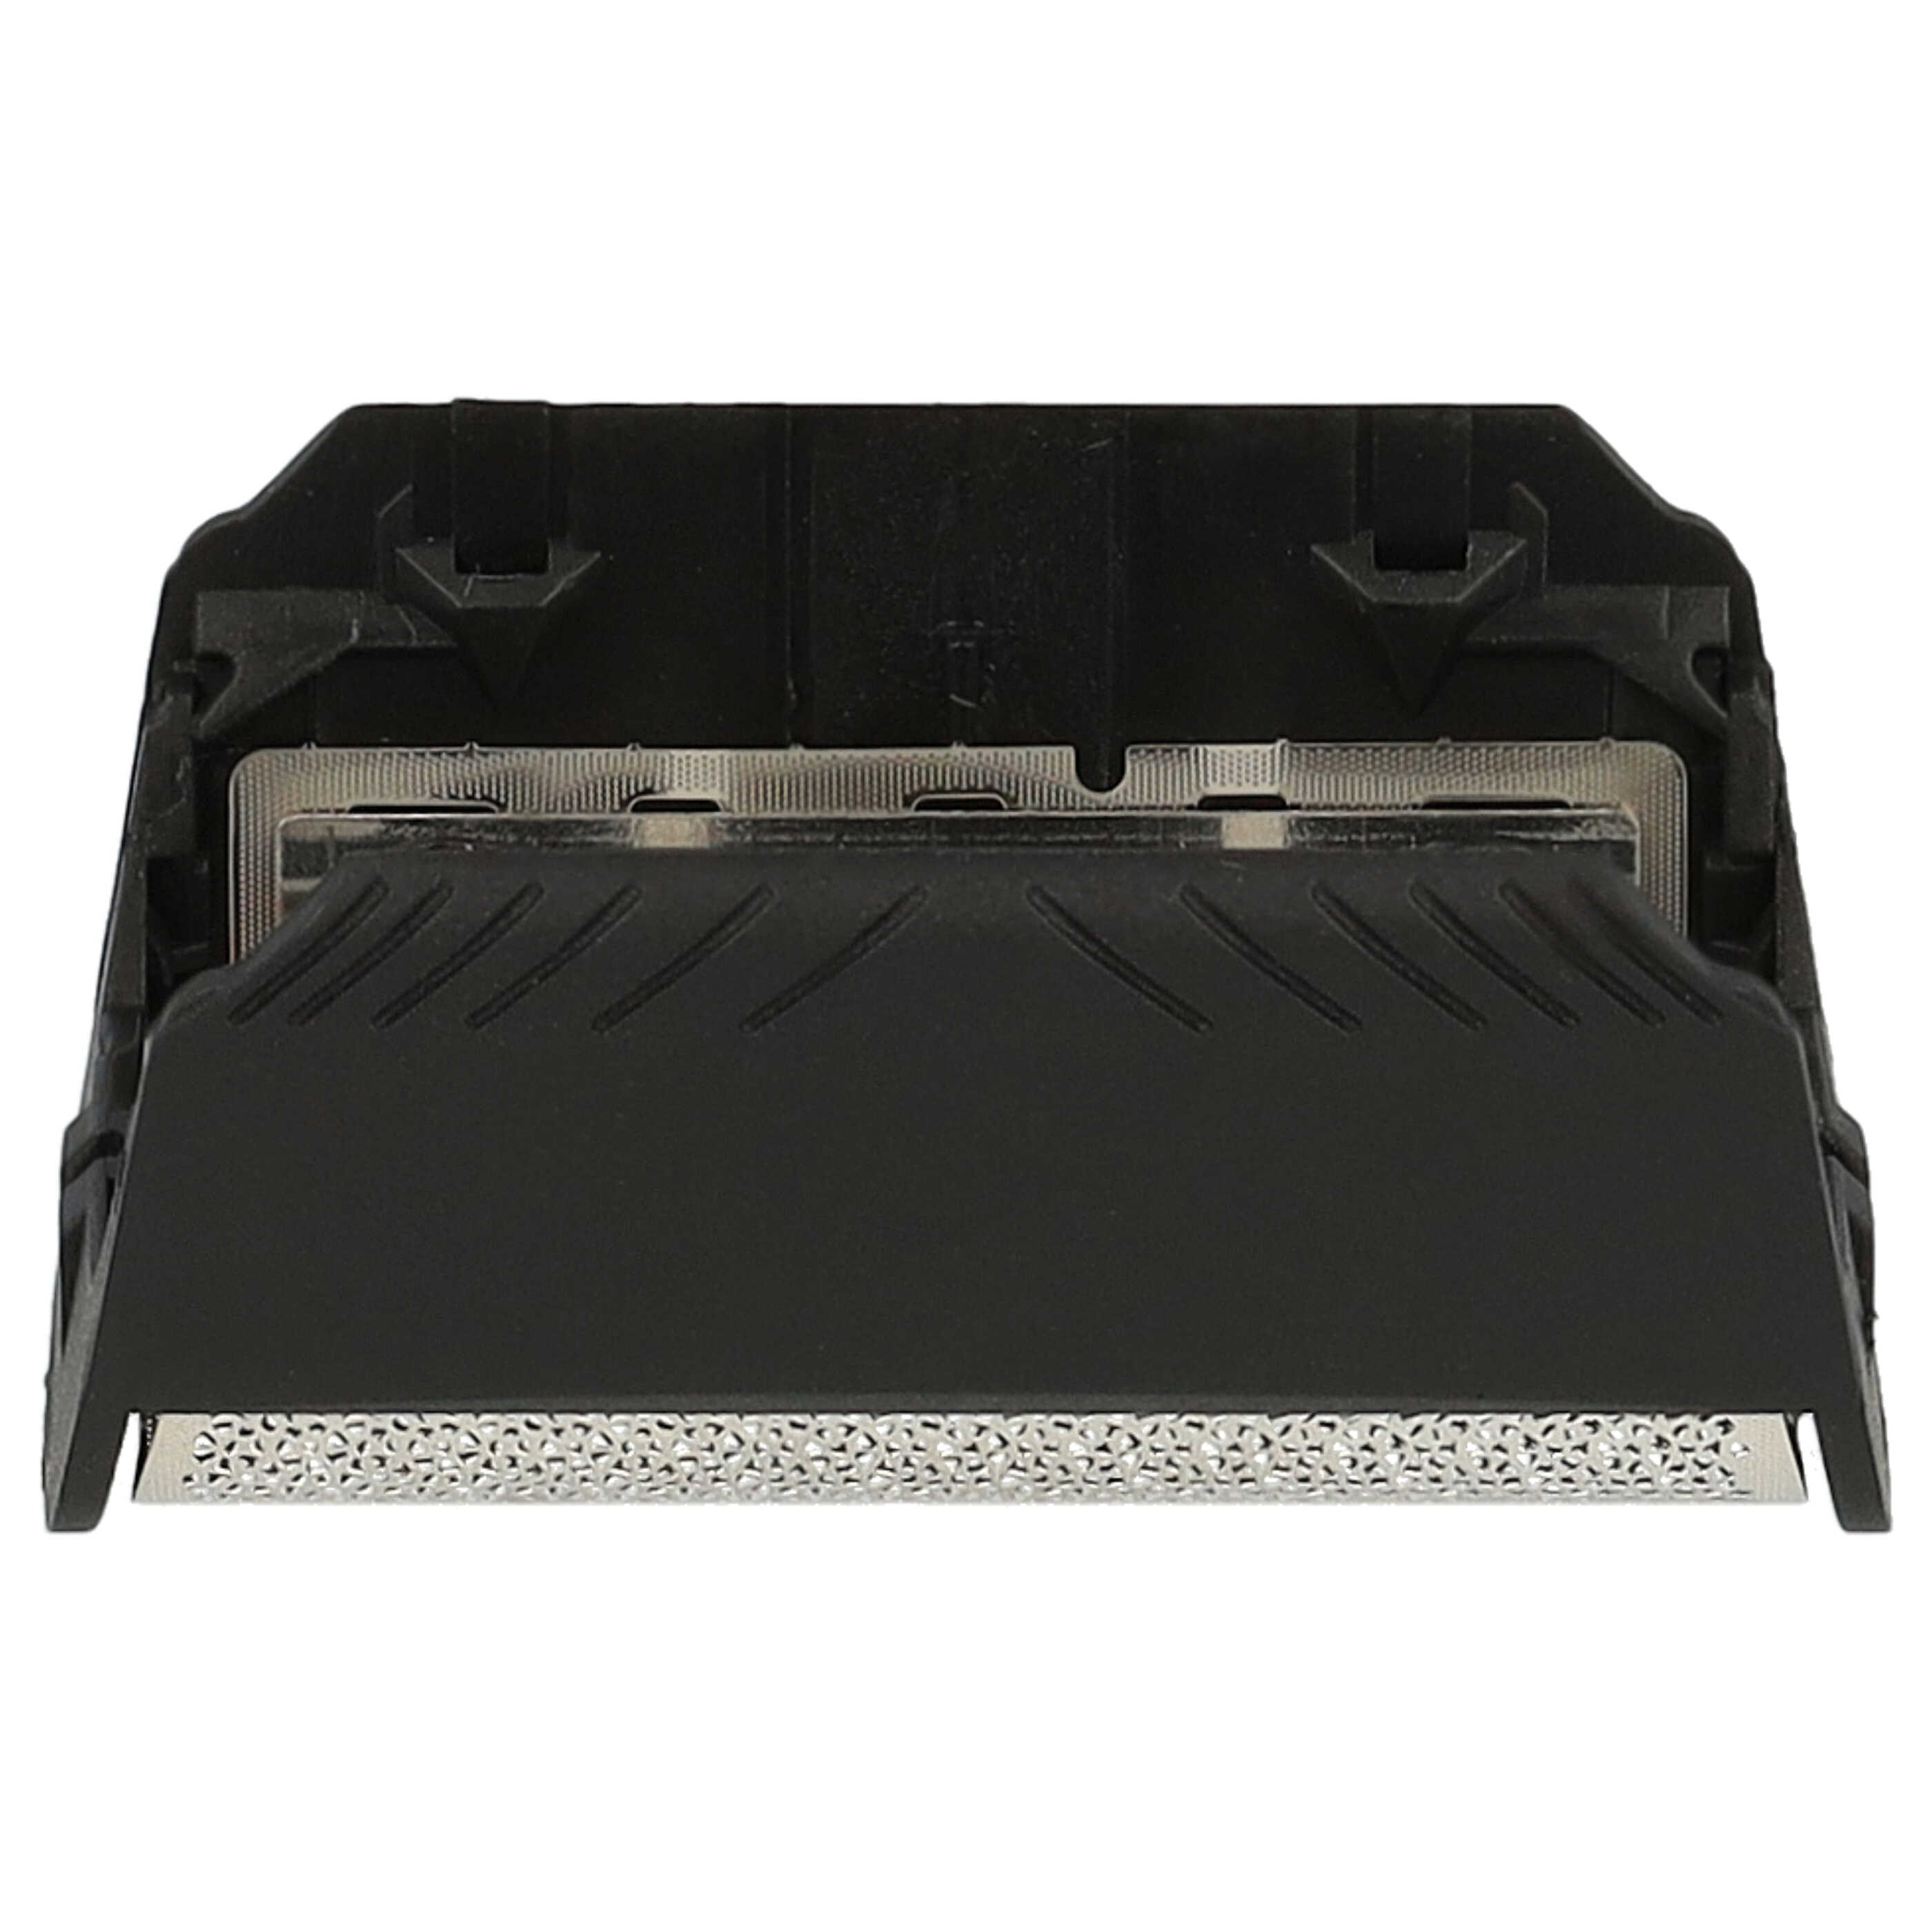 Dual Shaver Foil replaces Braun 30B Mul, 30B for for Razor - incl. Frame, Black